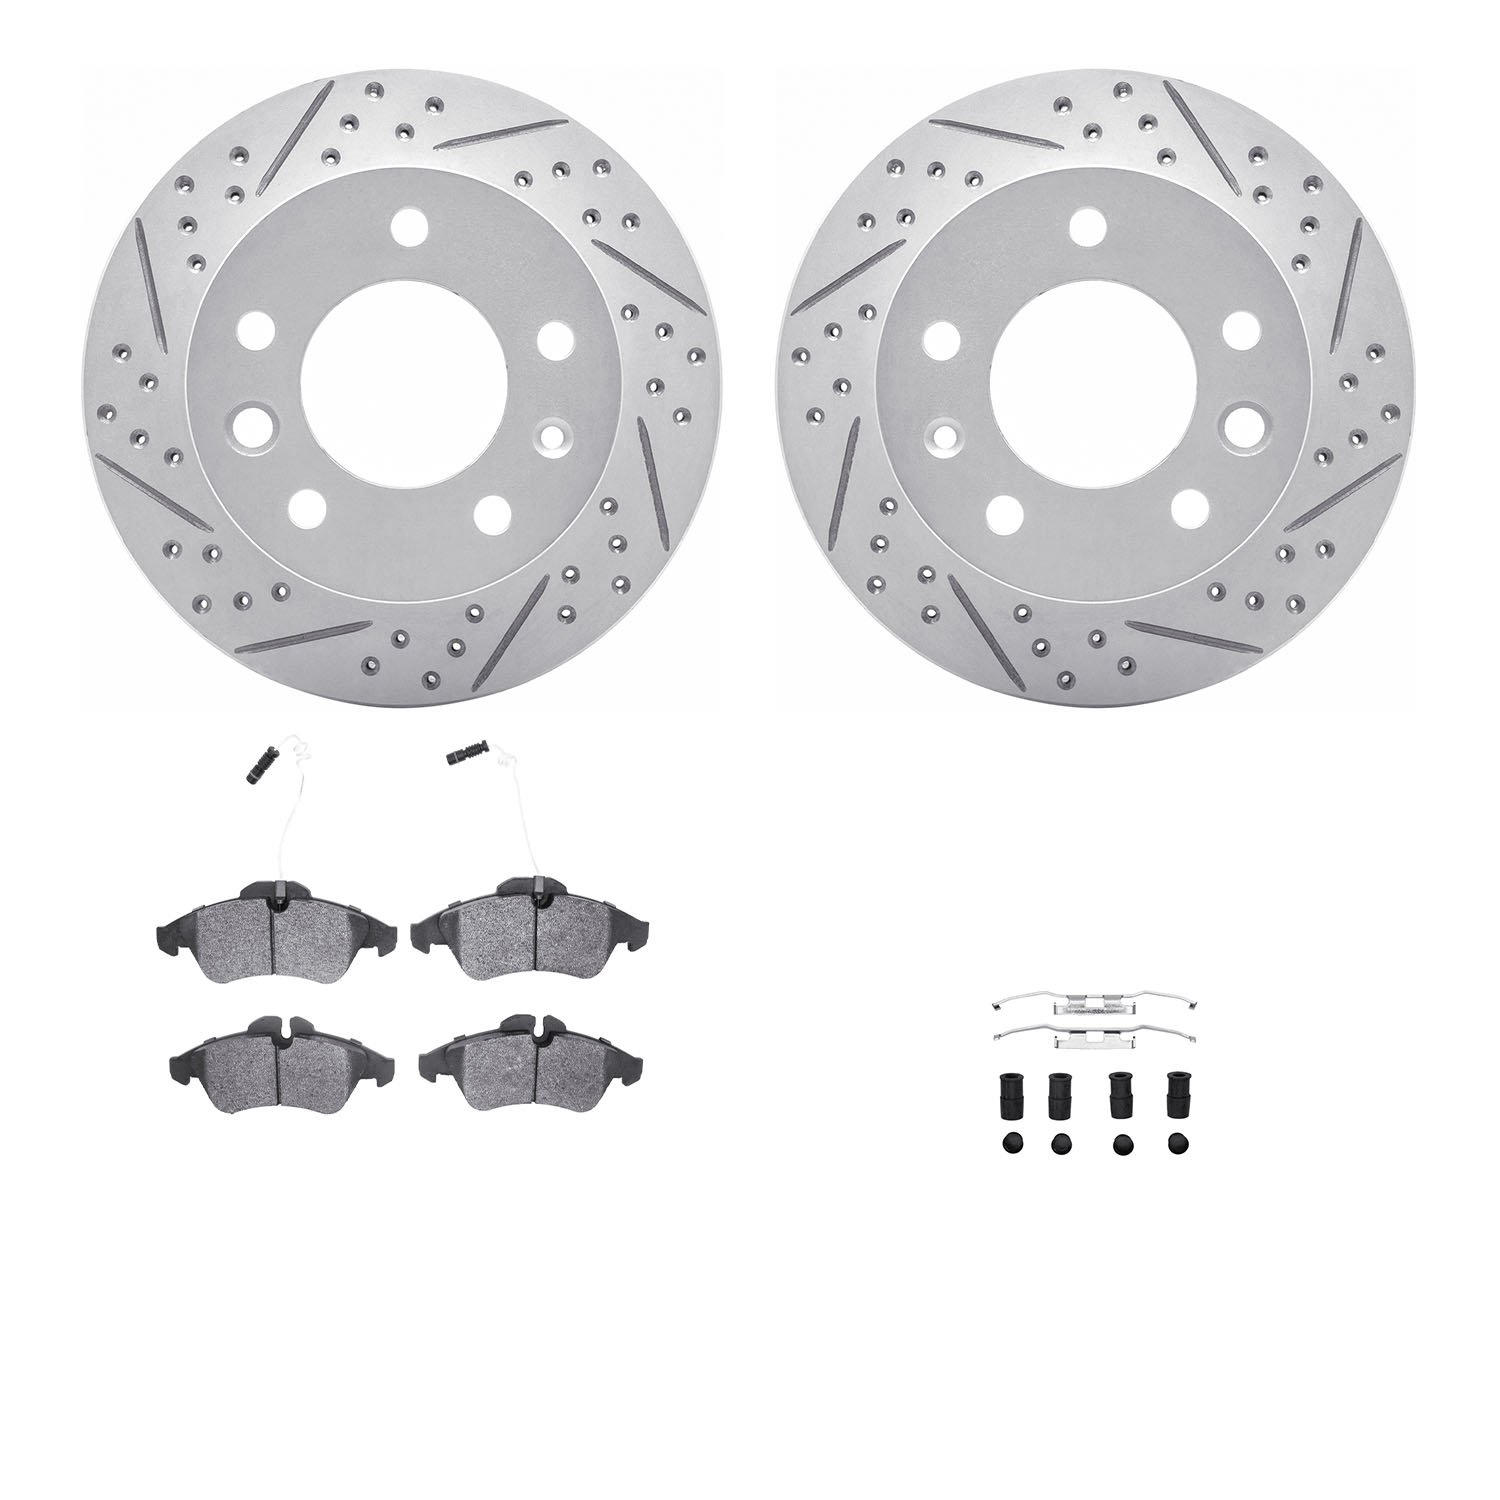 2212-40001 Geoperformance Drilled/Slotted Rotors w/Heavy-Duty Pads Kit & Hardware, 2002-2006 Multiple Makes/Models, Position: Fr